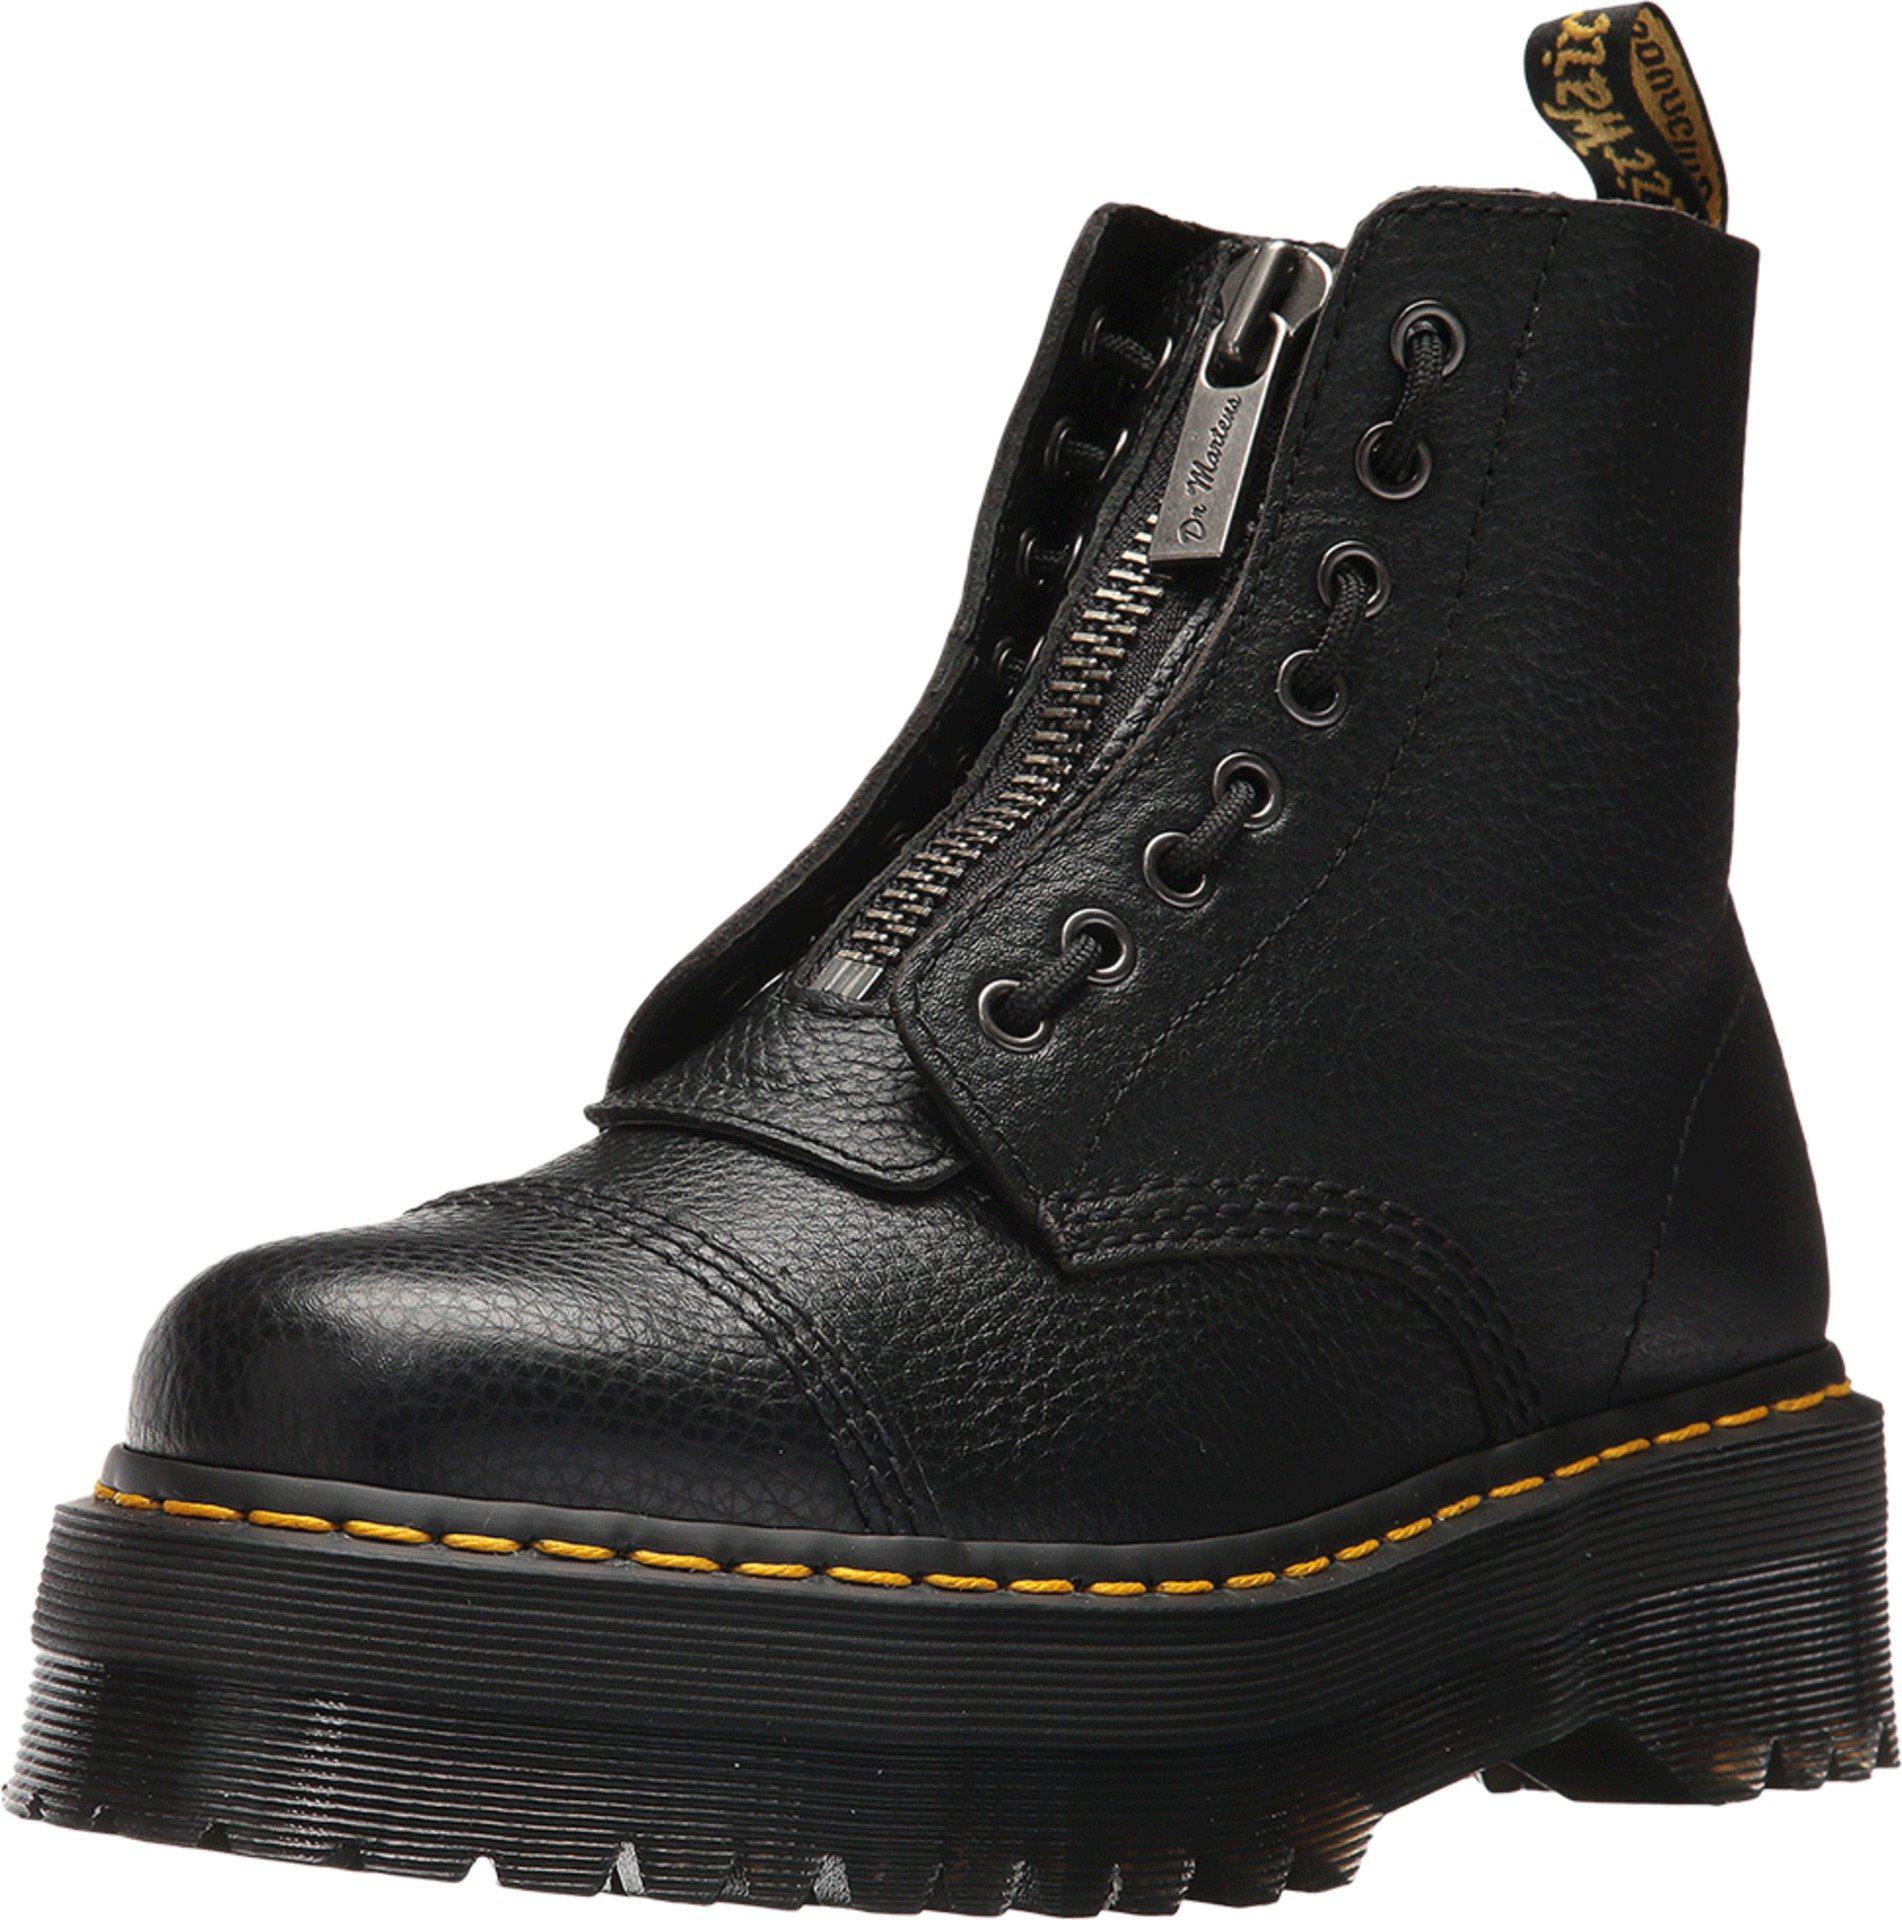 Lyst - Dr. Martens Sinclair Jungle Boot in Black